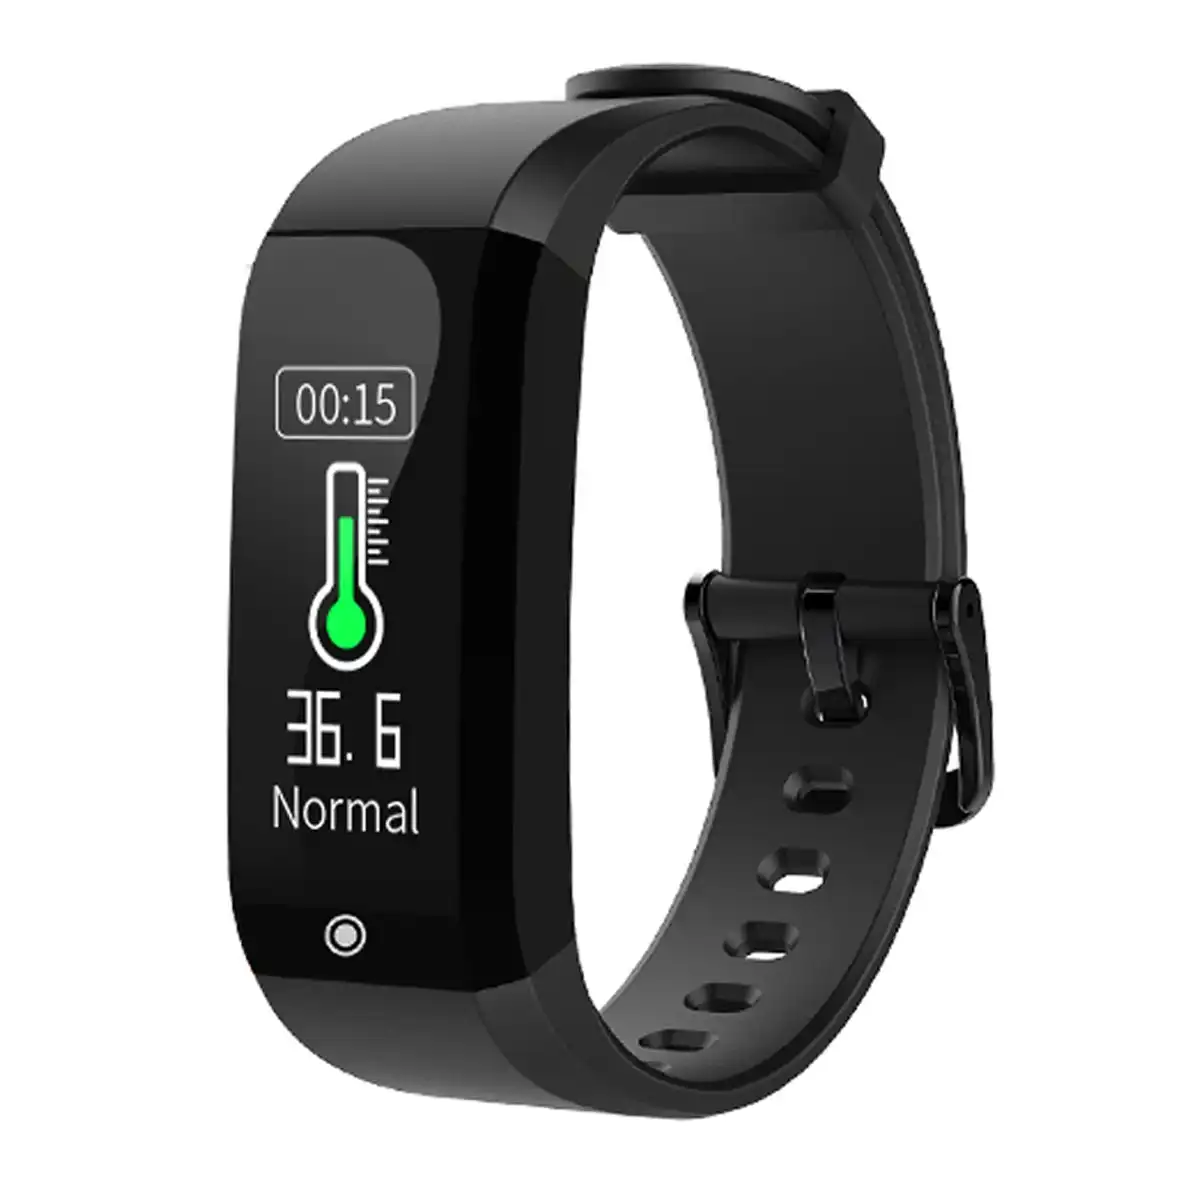 TODO Body Temperature Smart Watch Thermometer BPM Heart Rate Monitor Fitness Band - Black